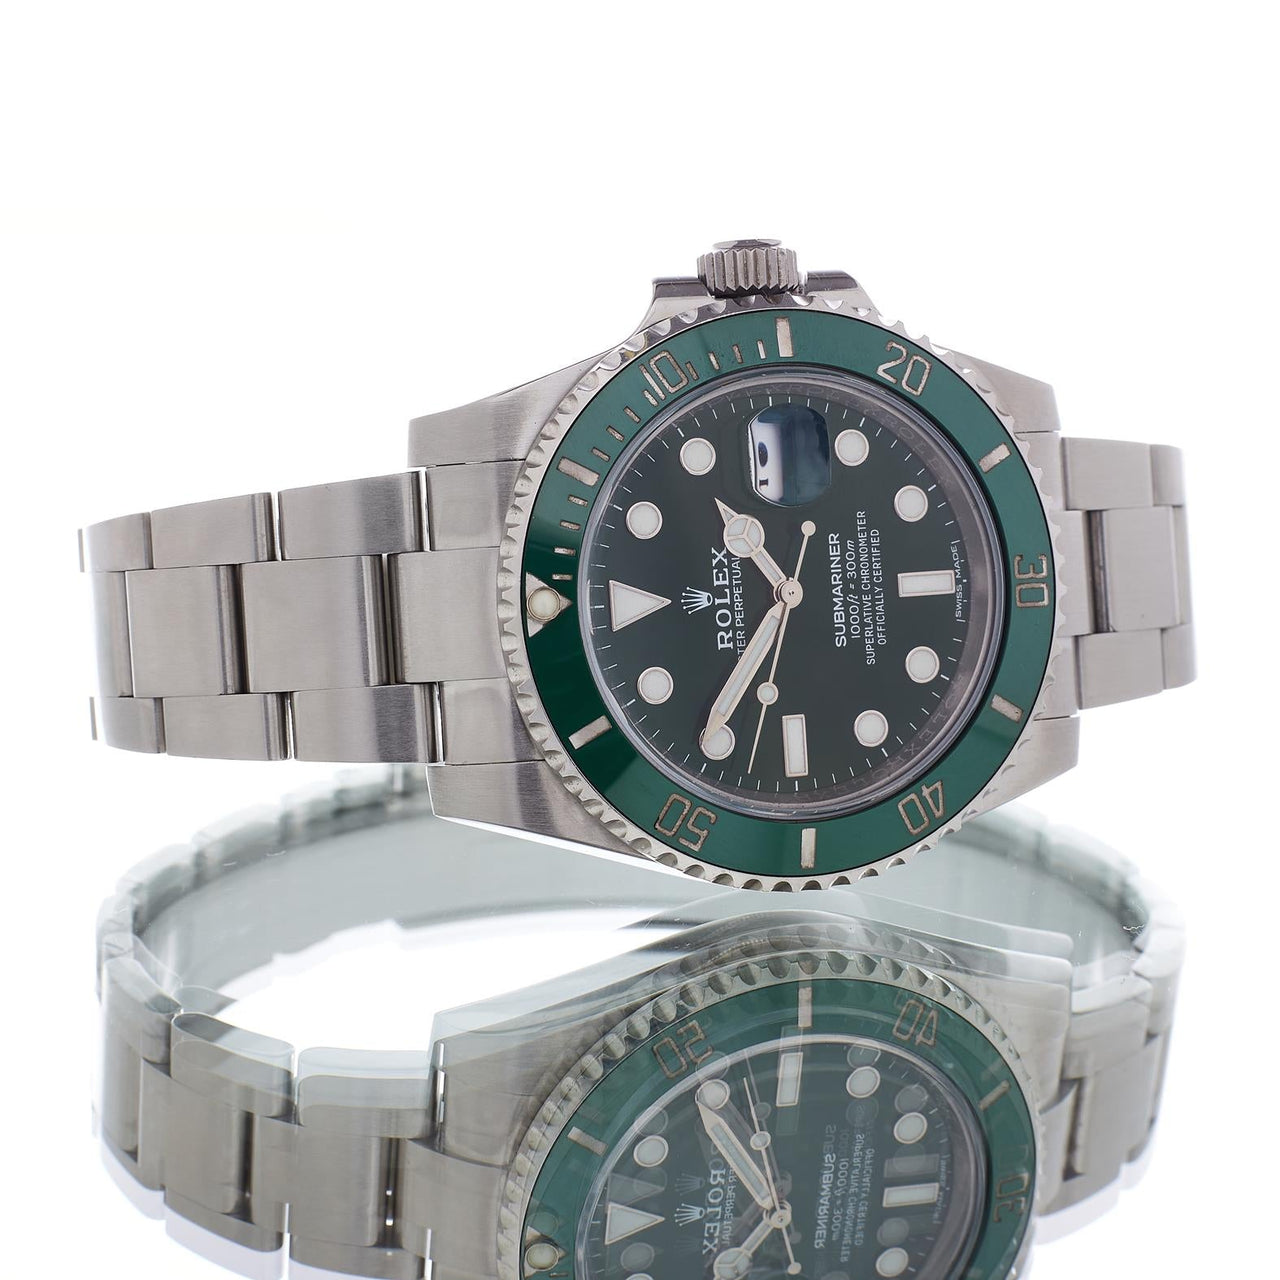 Pre-Owned Rolex Submariner 116610 LV Watch